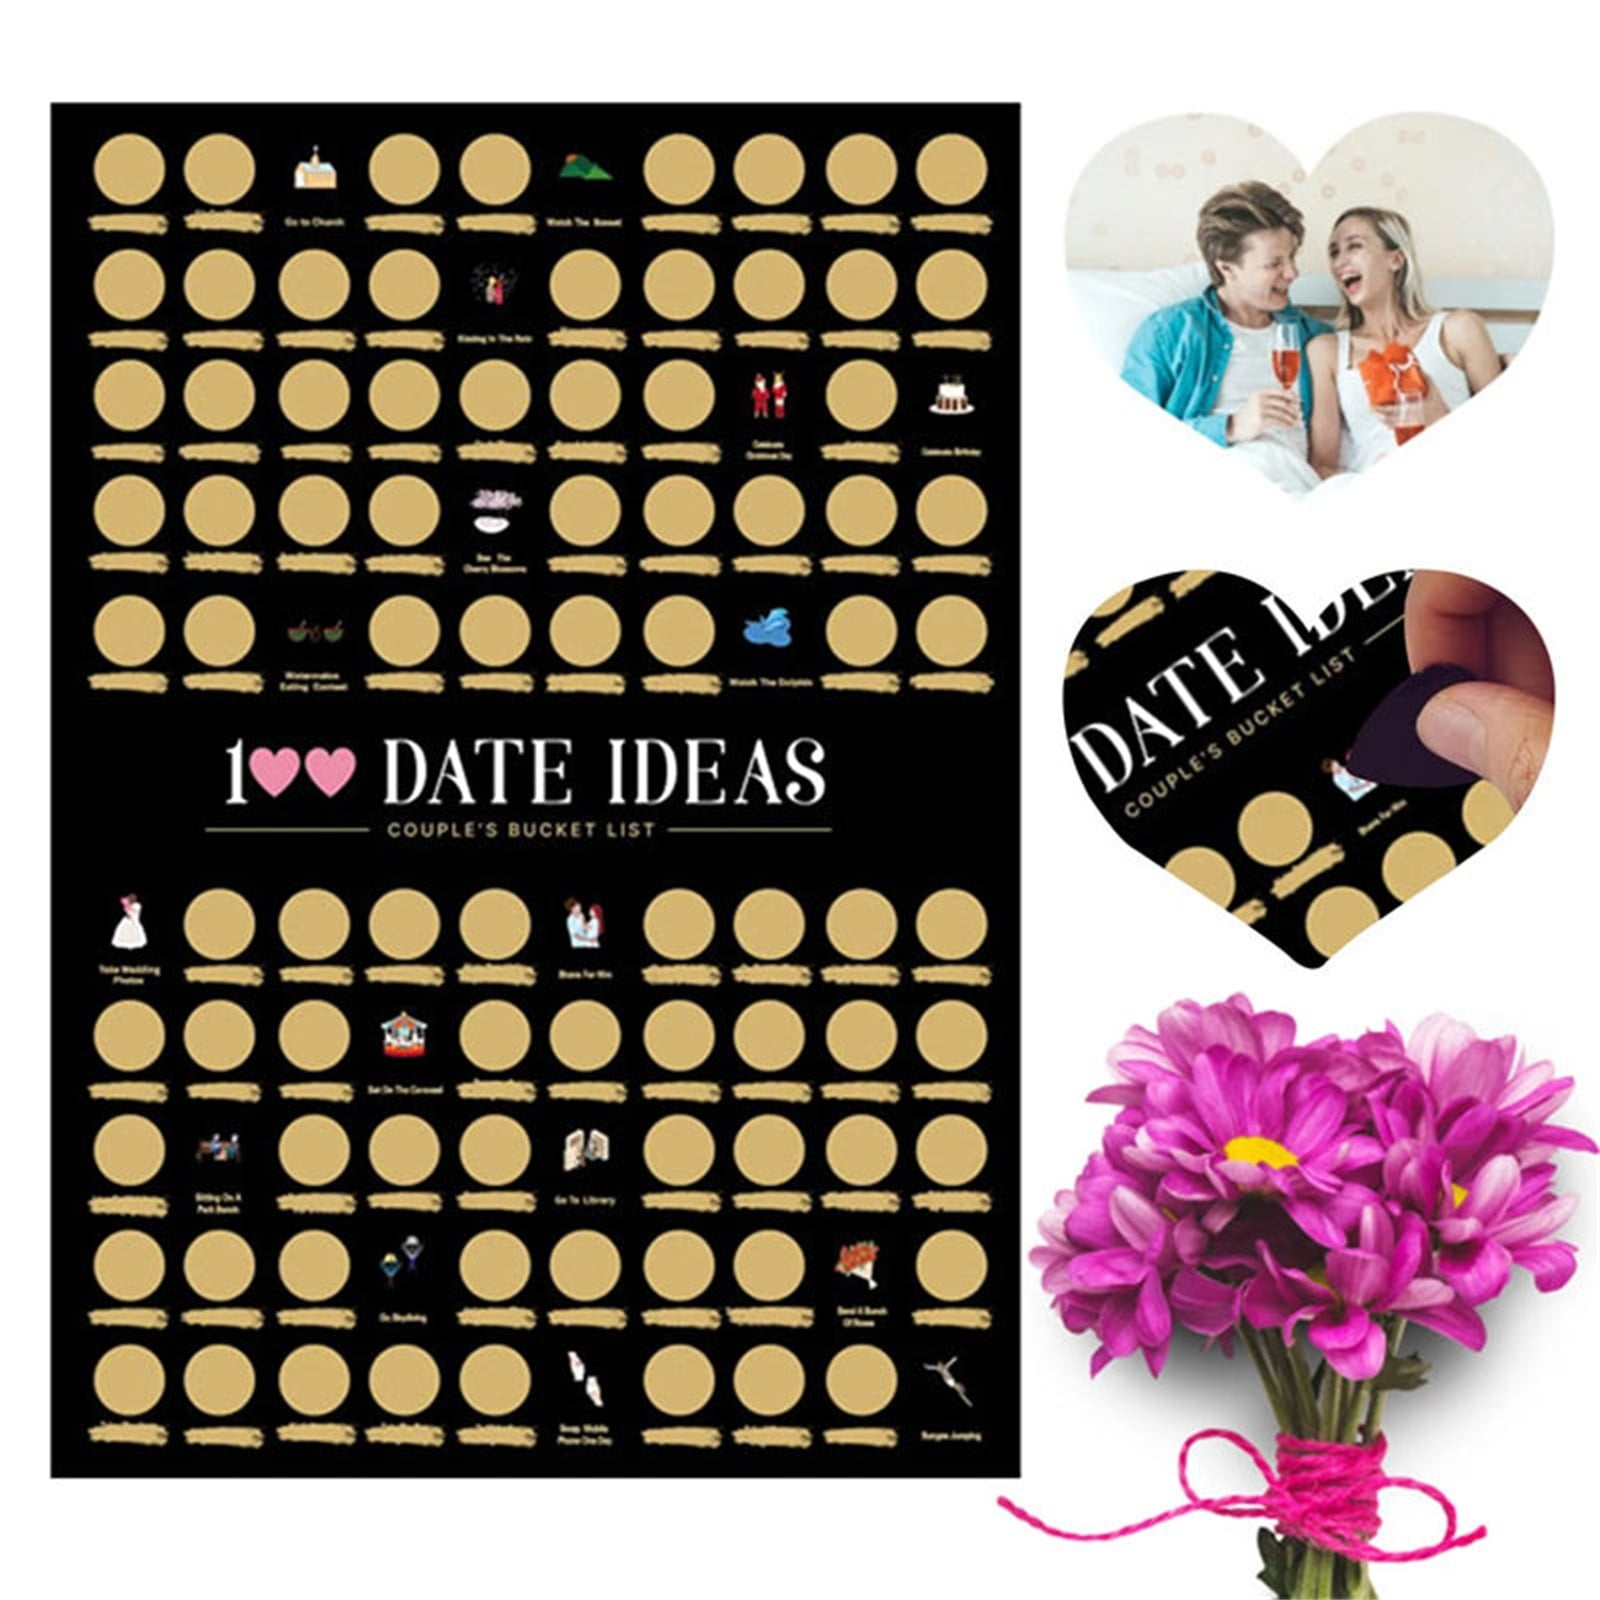 Keusn 100 Dates Ideas Scratch Off Poster Engagement Gifts for Her Date Night Anniversary for Couples Birthday Gifts for Women Wedding Gifts Matching